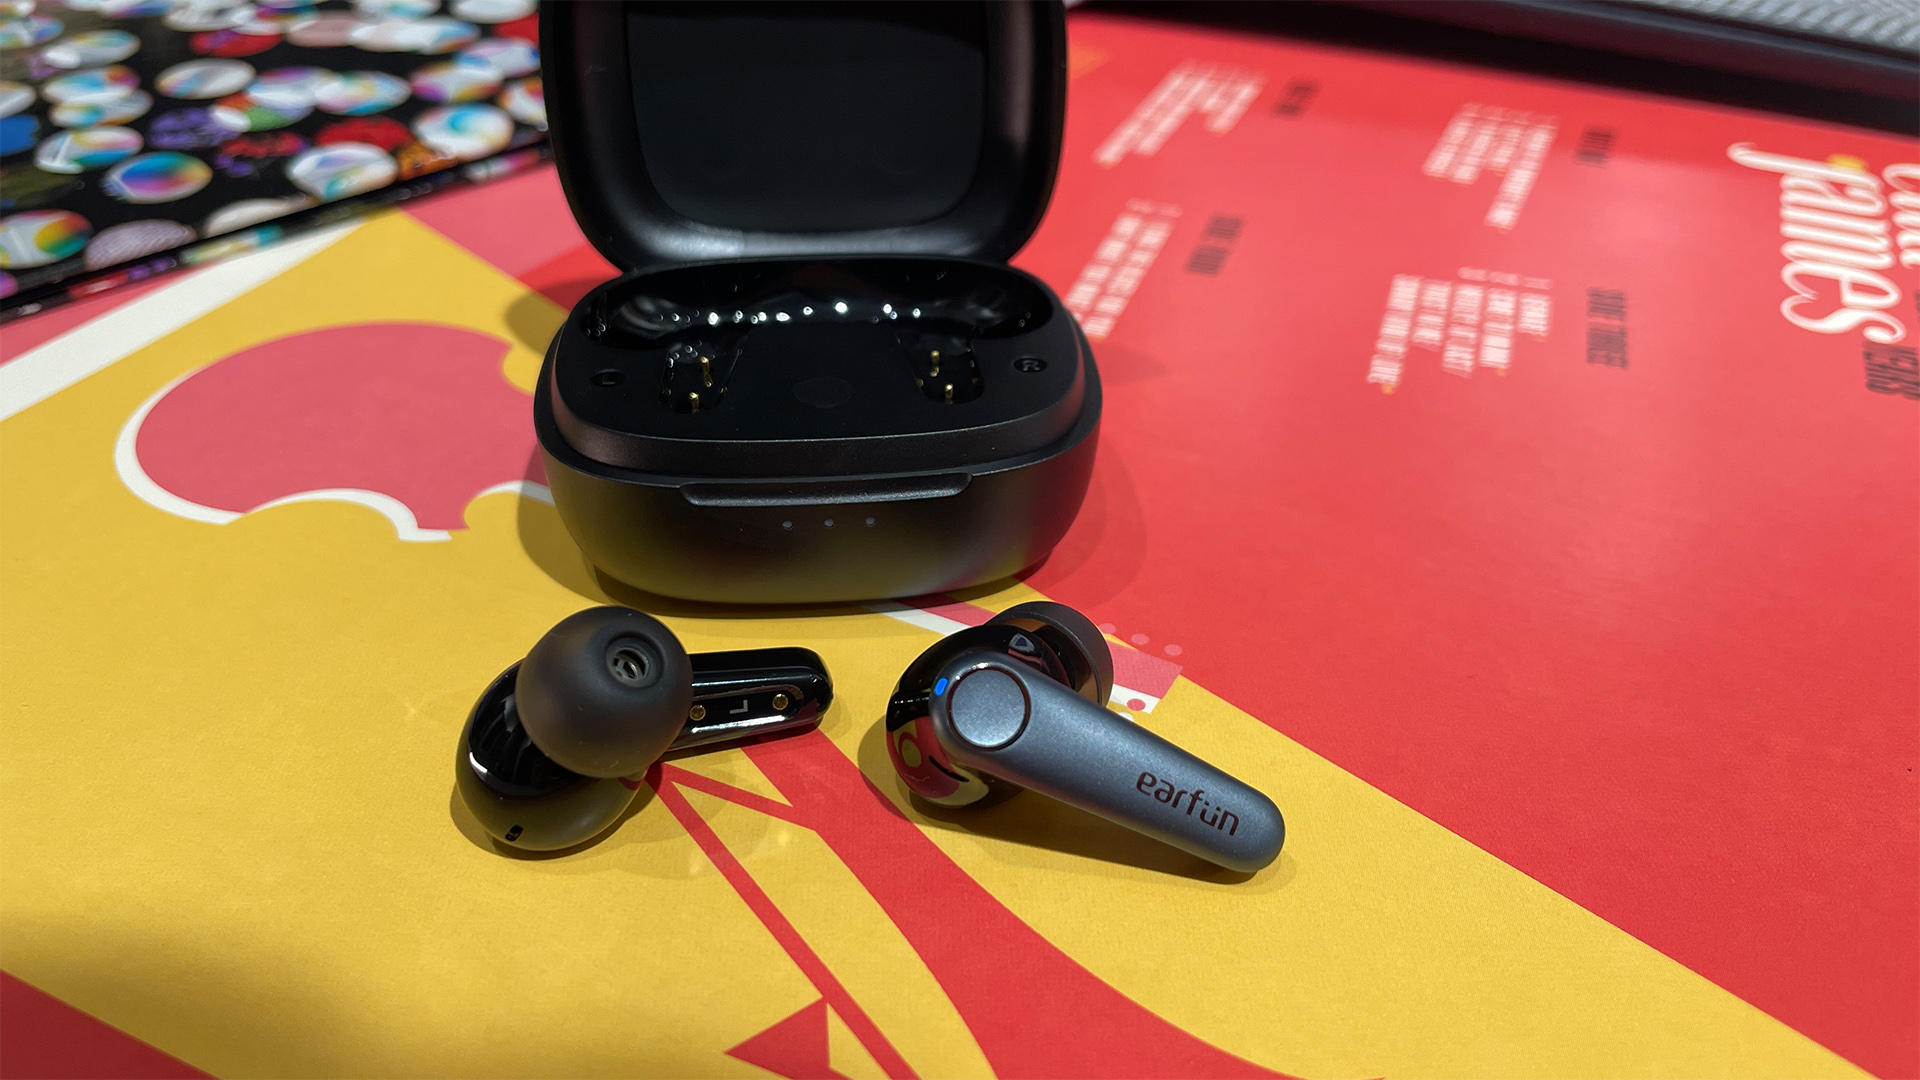 True Wireless Earbuds: Reviewed for Small Ears - Video - CNET